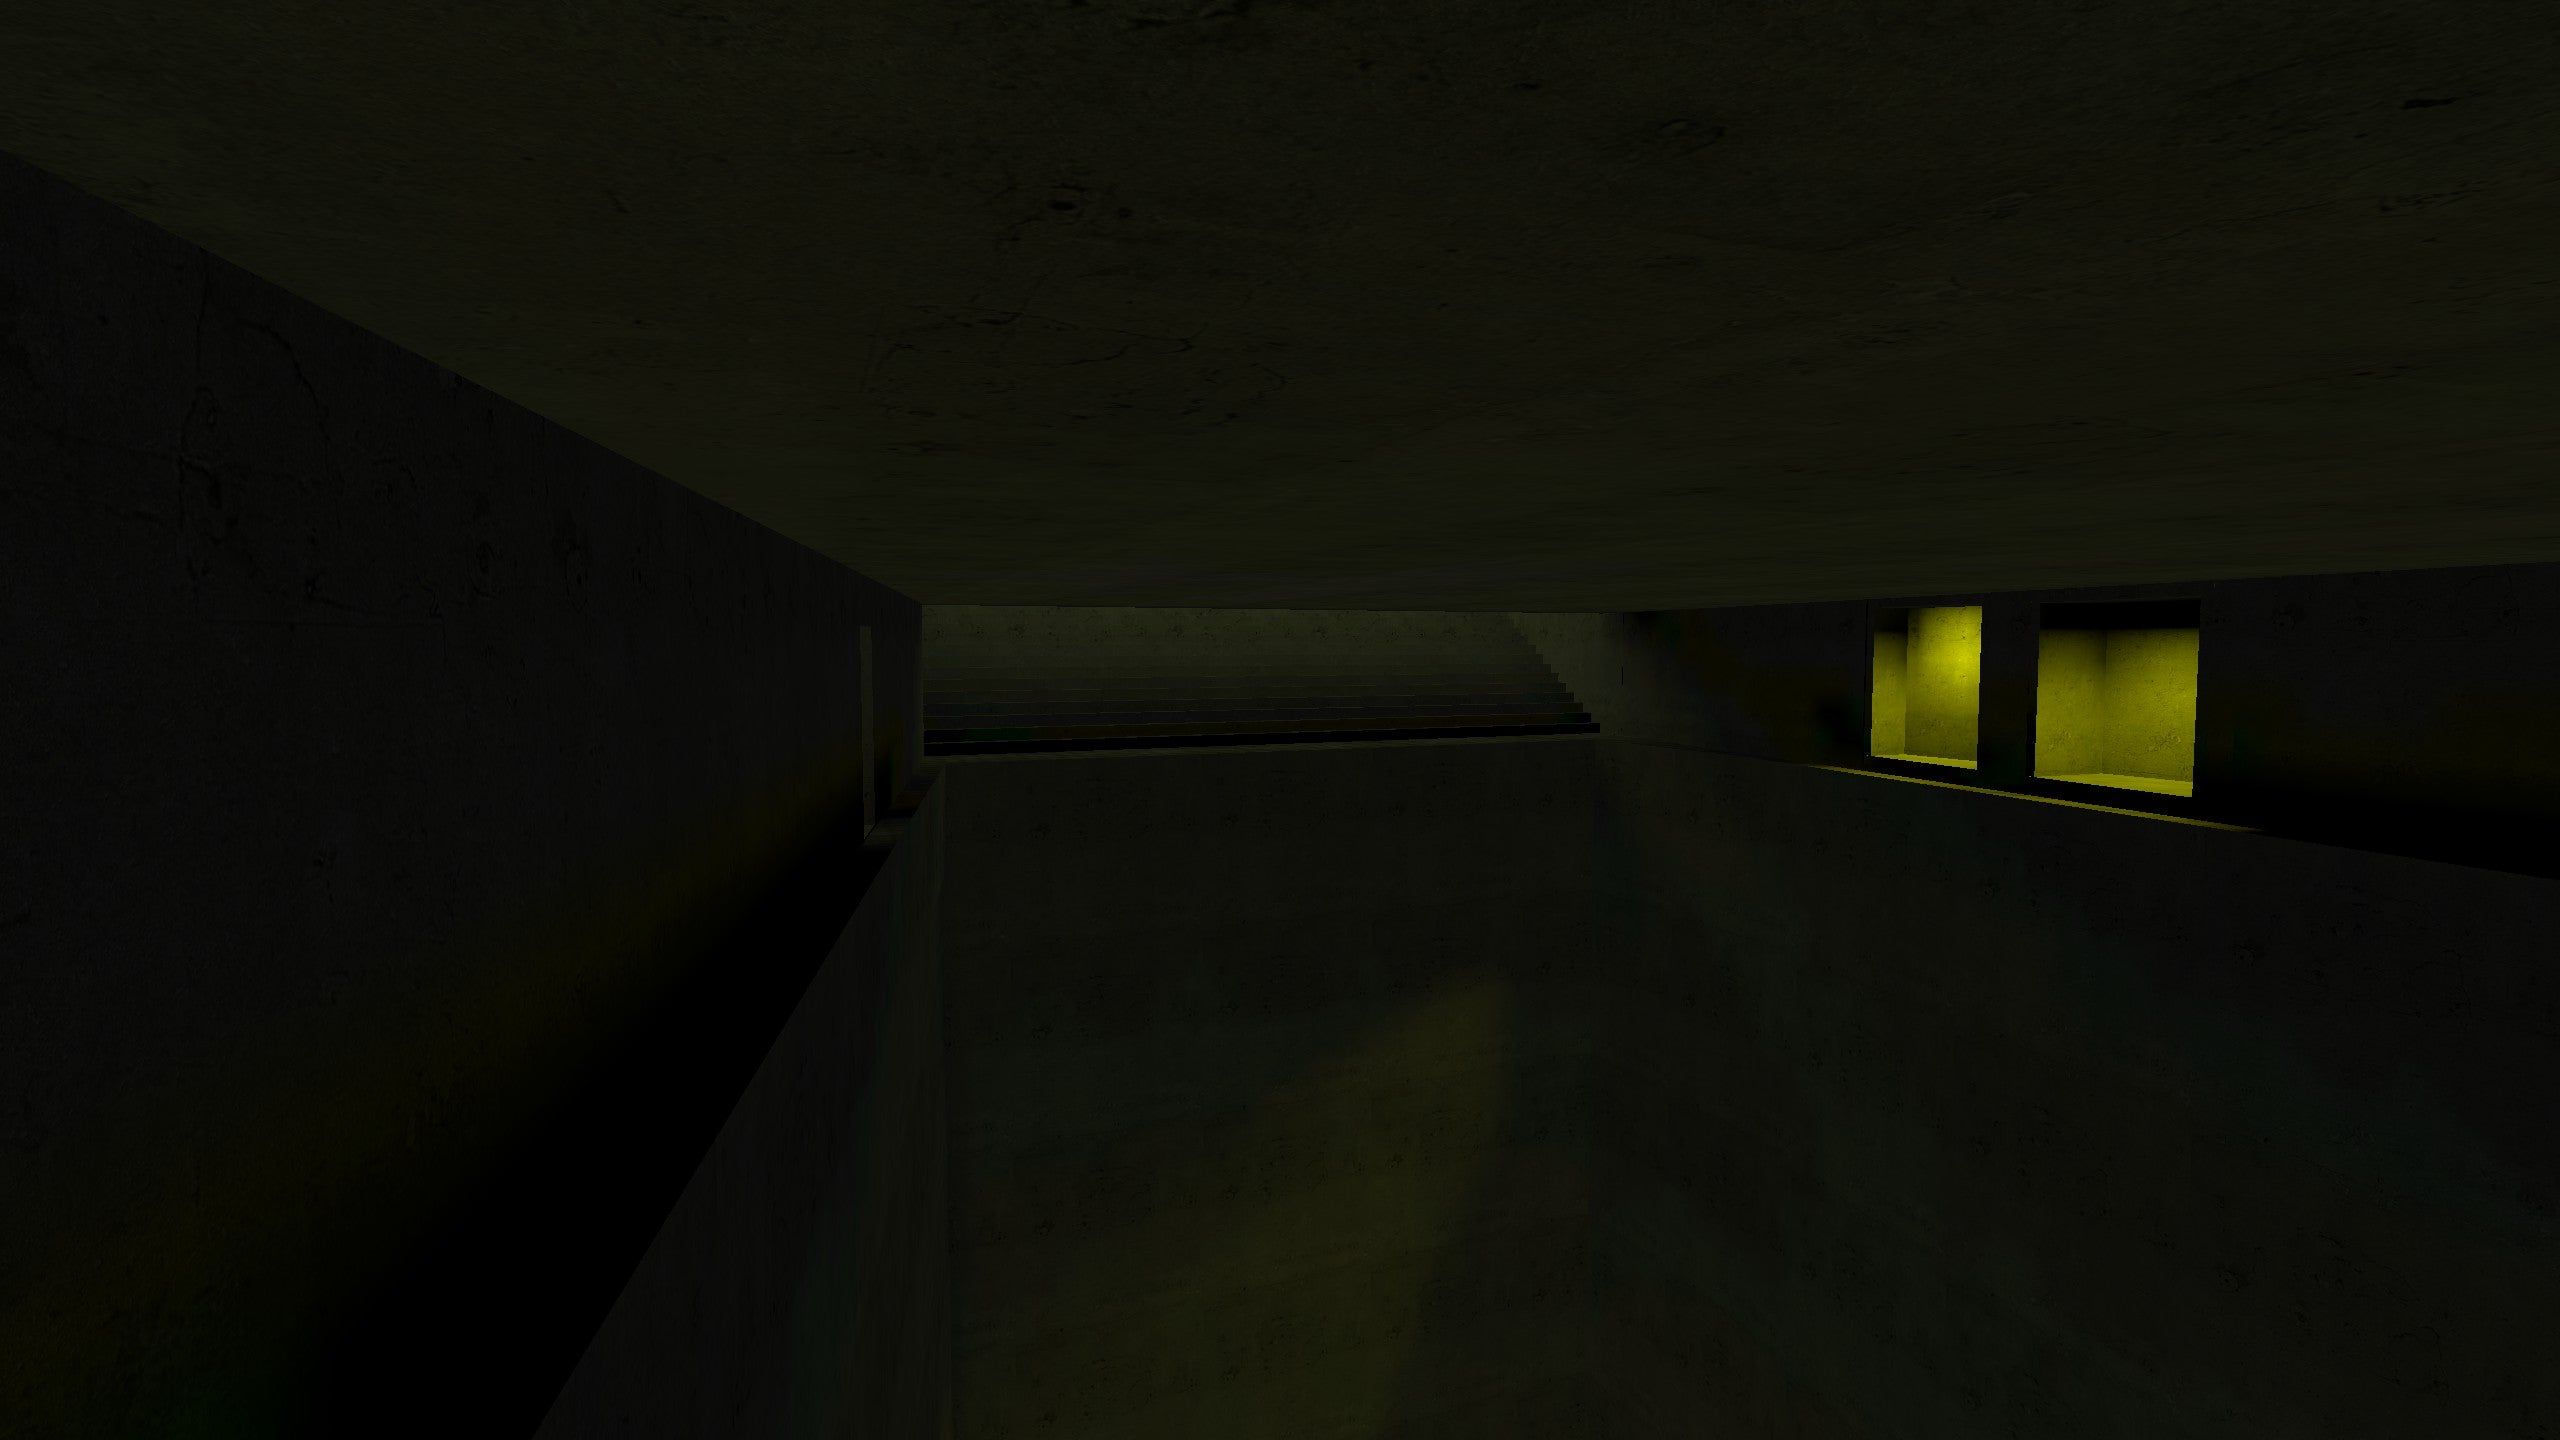 First attempt creating a Liminal space using Source Hammer Editor (based off rick amor's work)